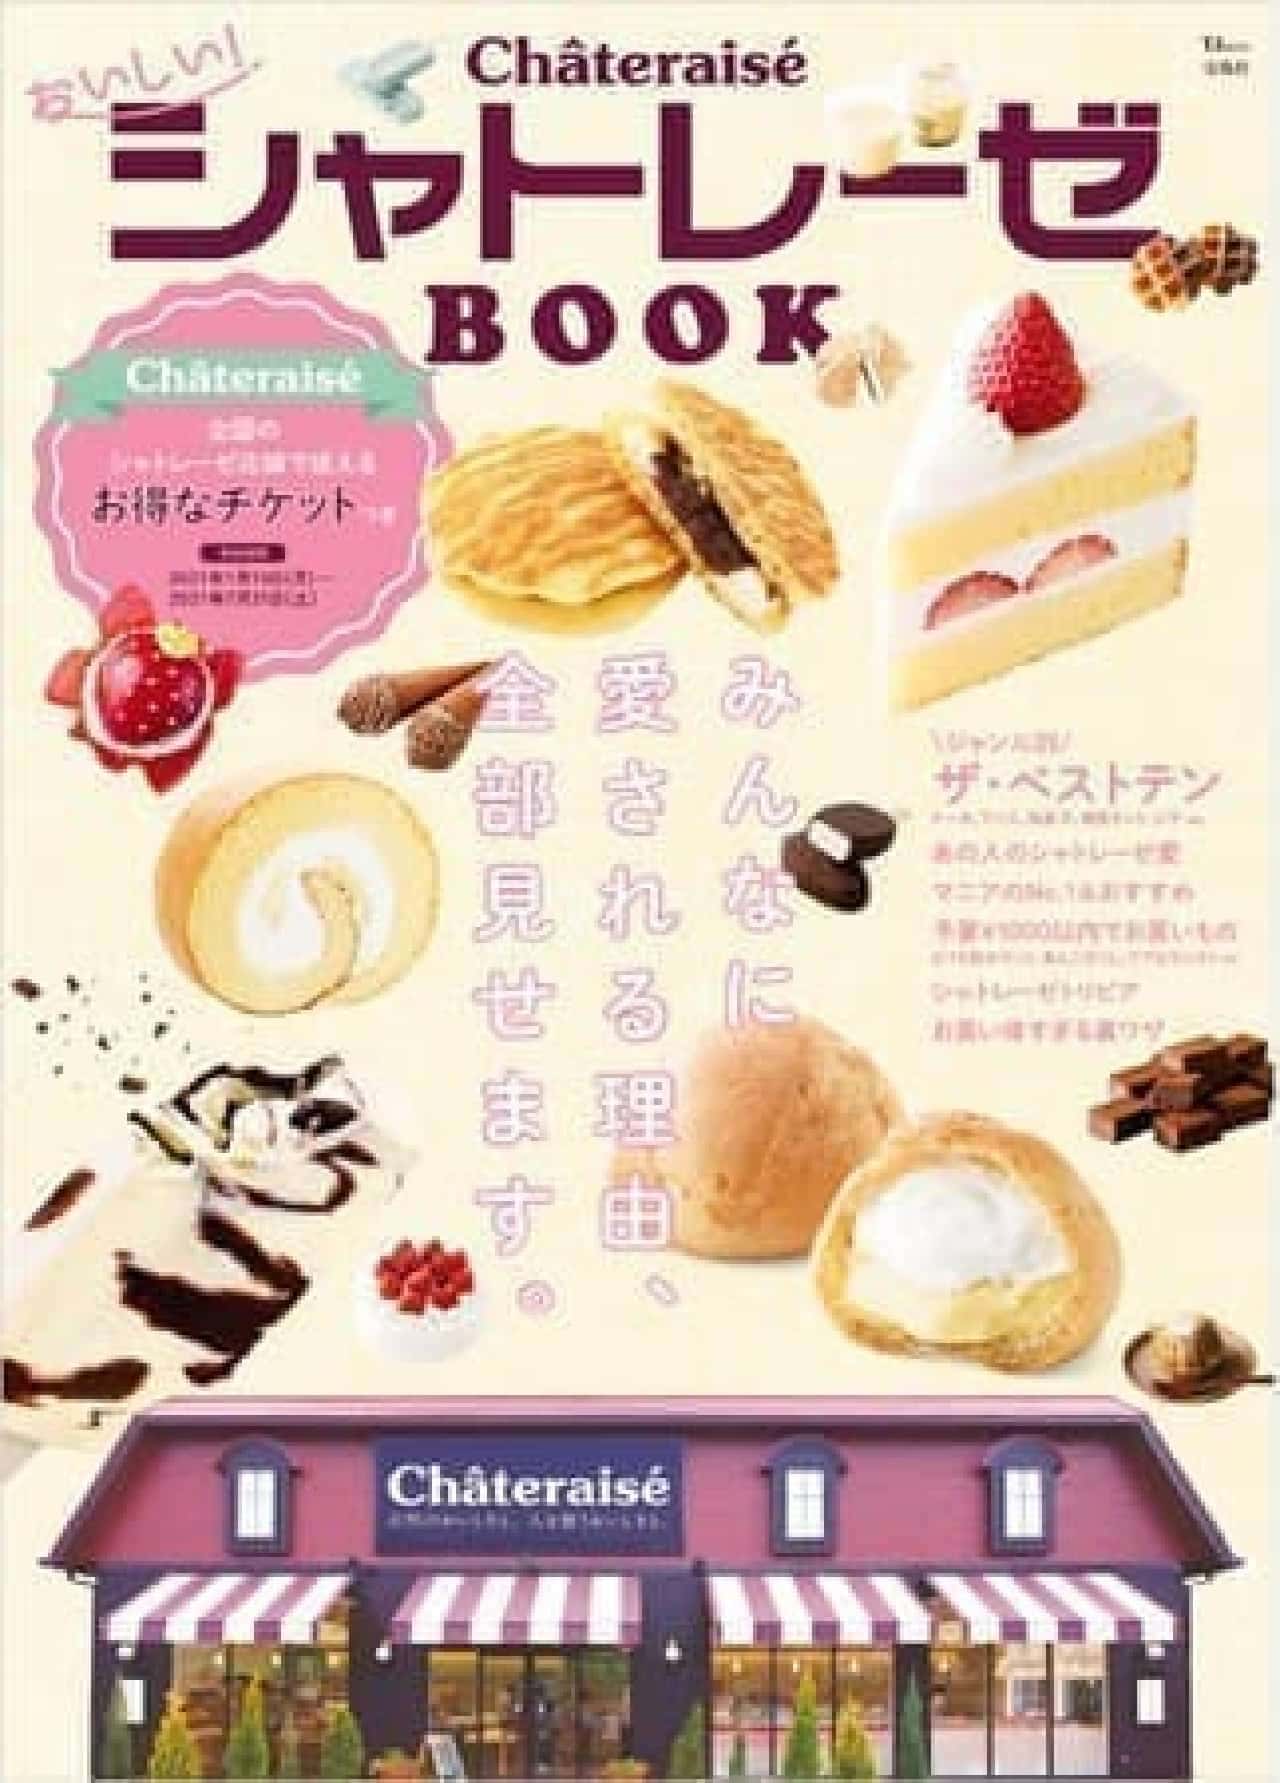 Delicious! Chateraise BOOK